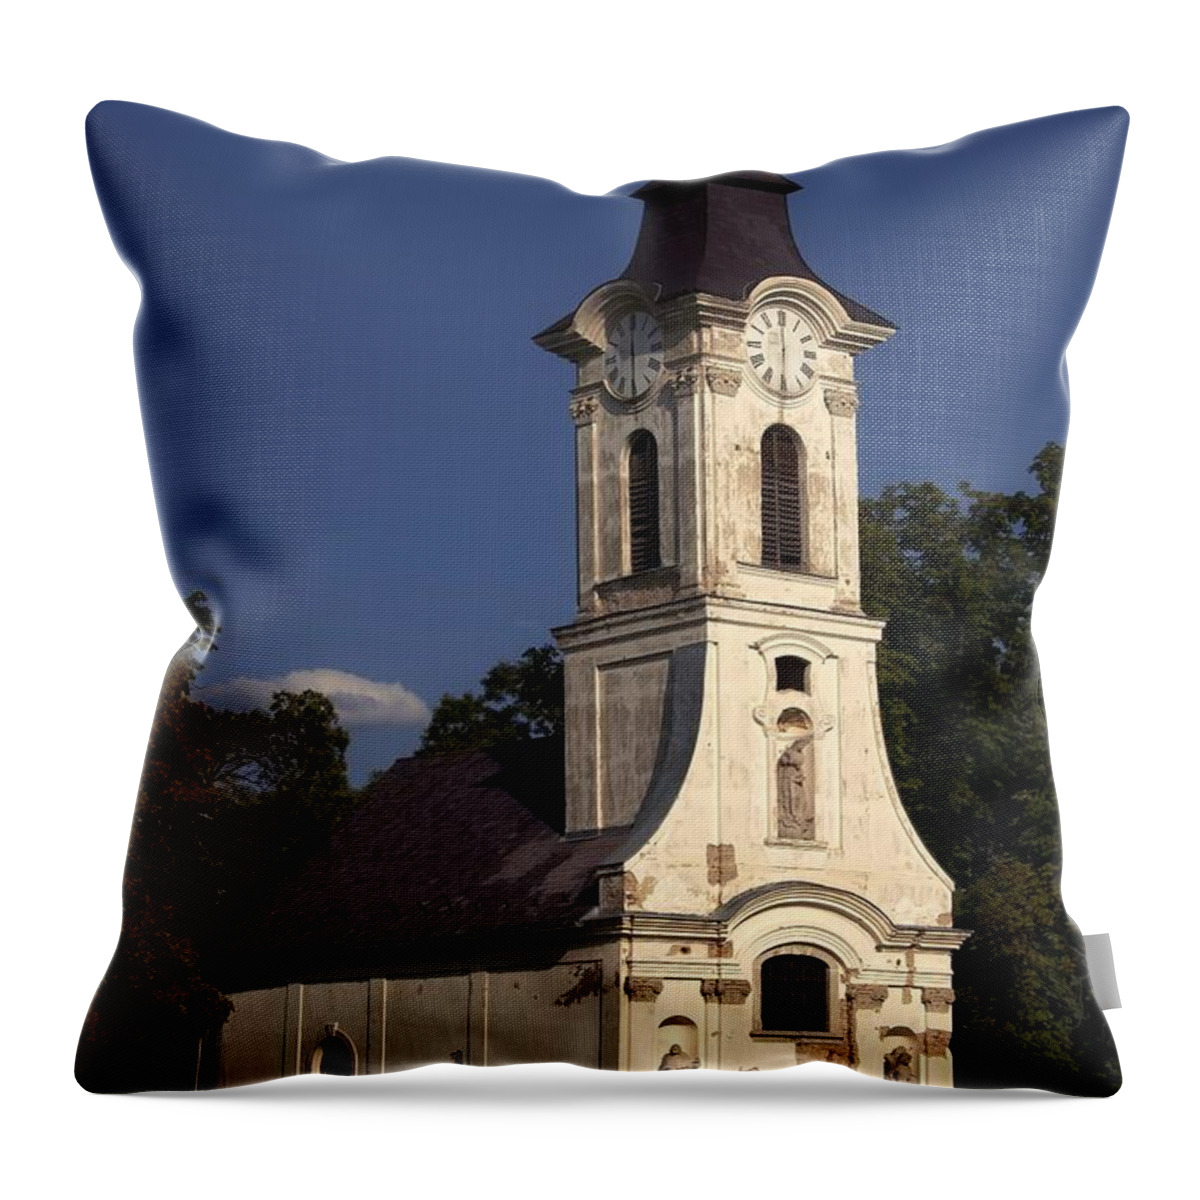 Church Throw Pillow featuring the photograph Lovasbereny by Mary Lane